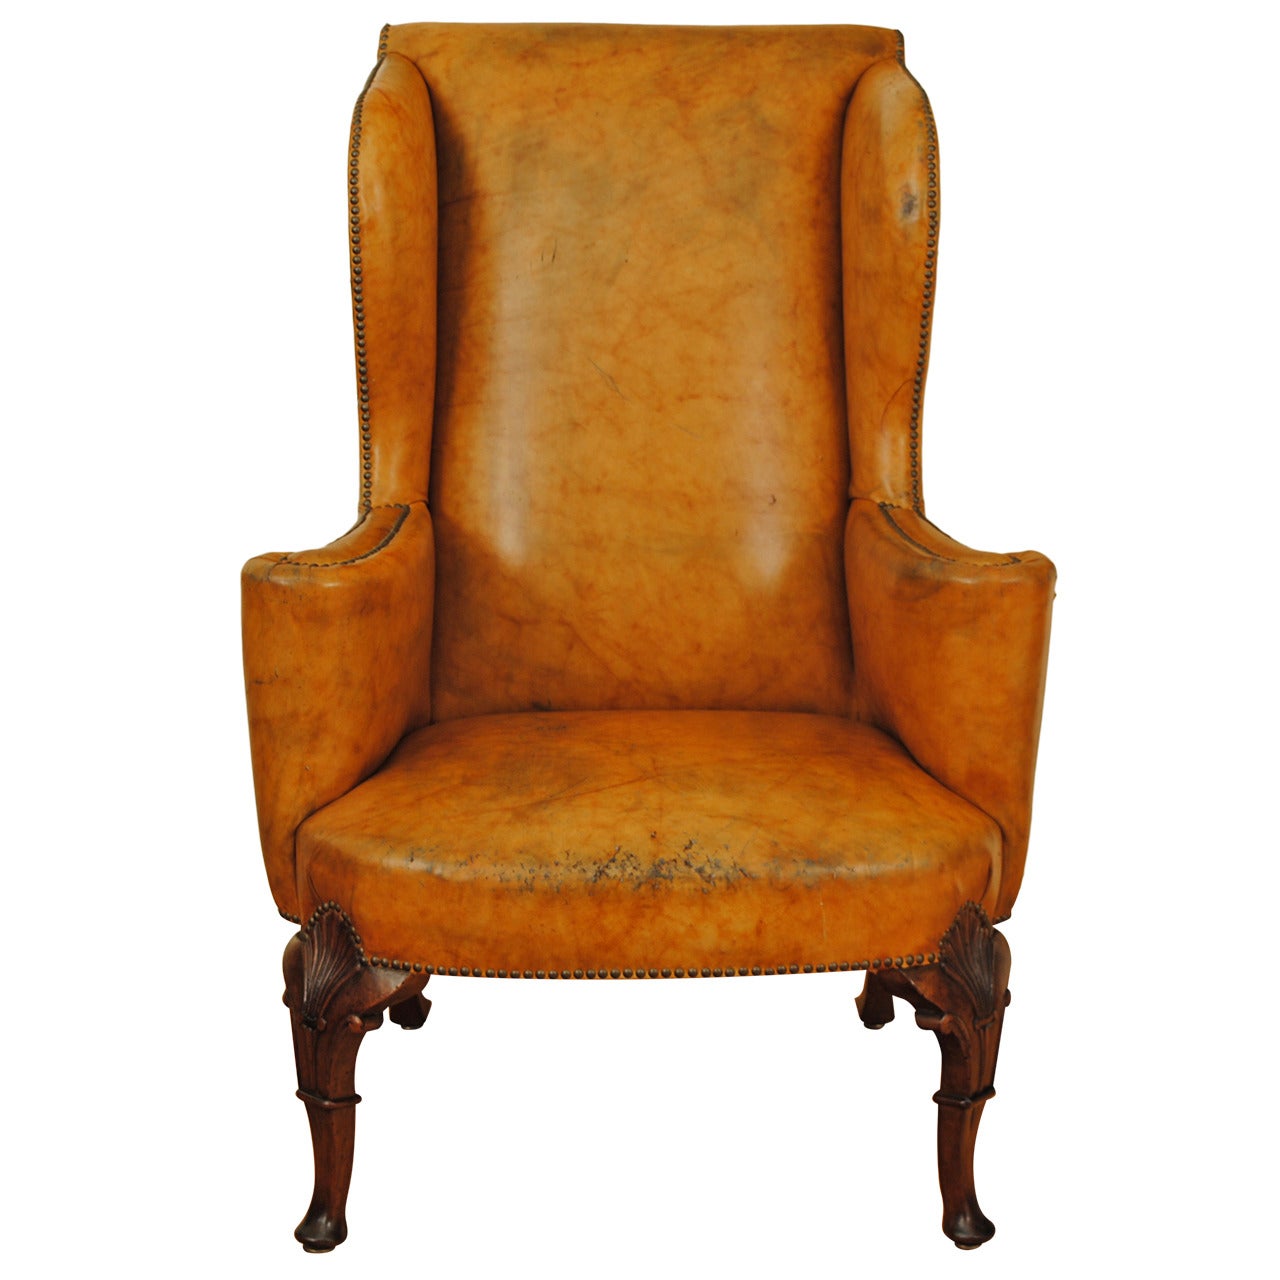 Carved Walnut Georgian Style Leather Upholstered Wing Chair